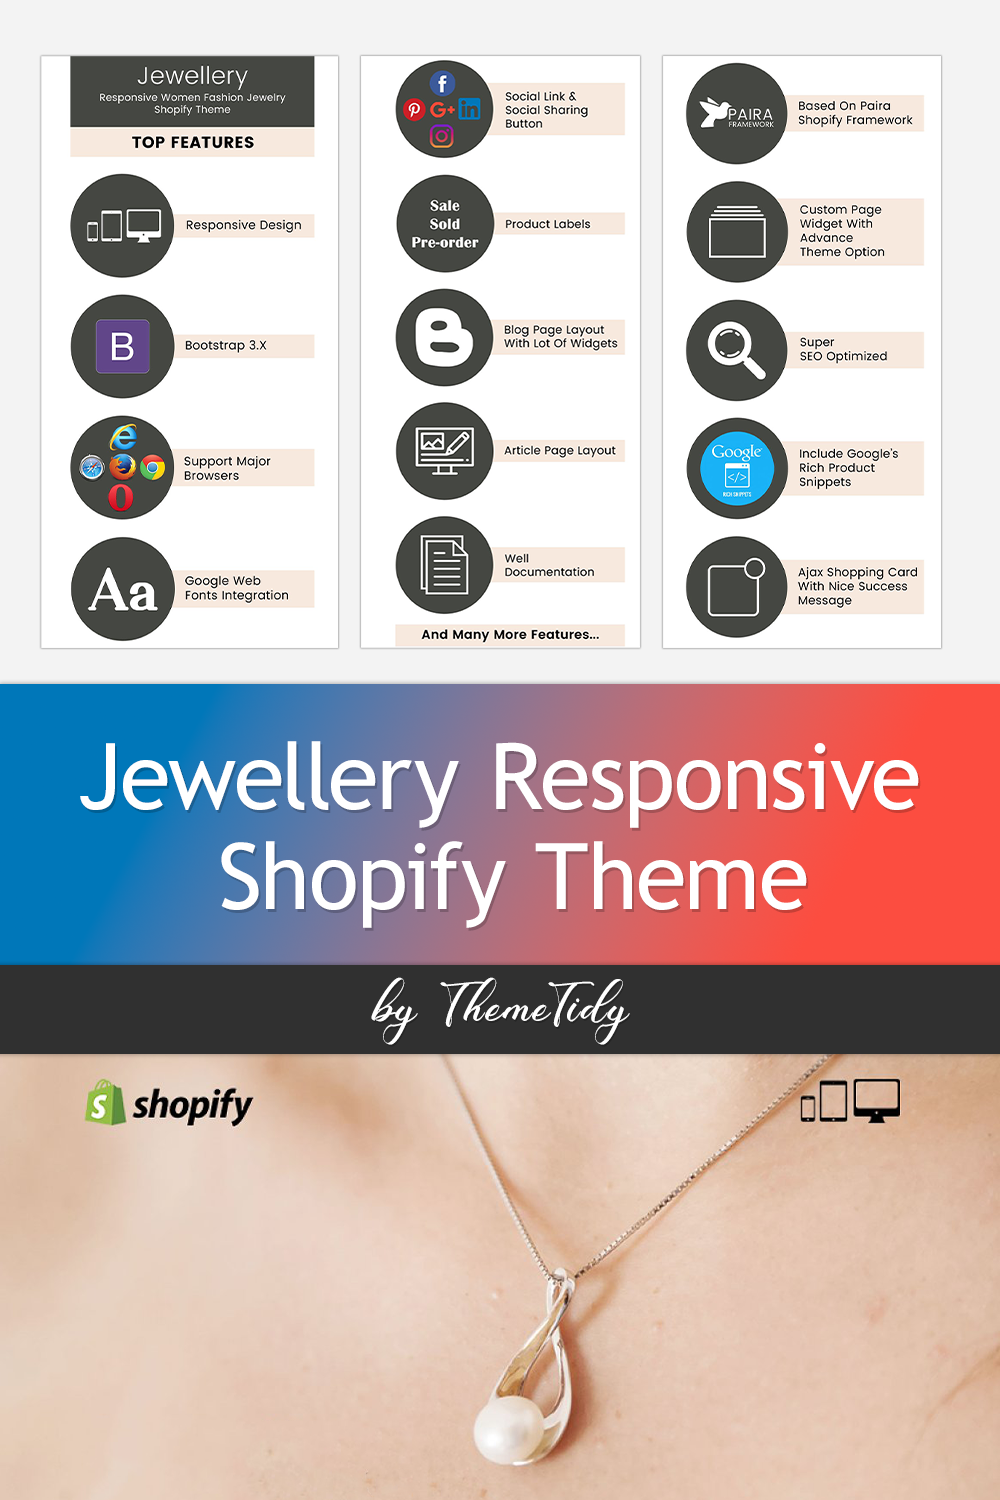 Jewellery responsive shopify theme images of pinterest.